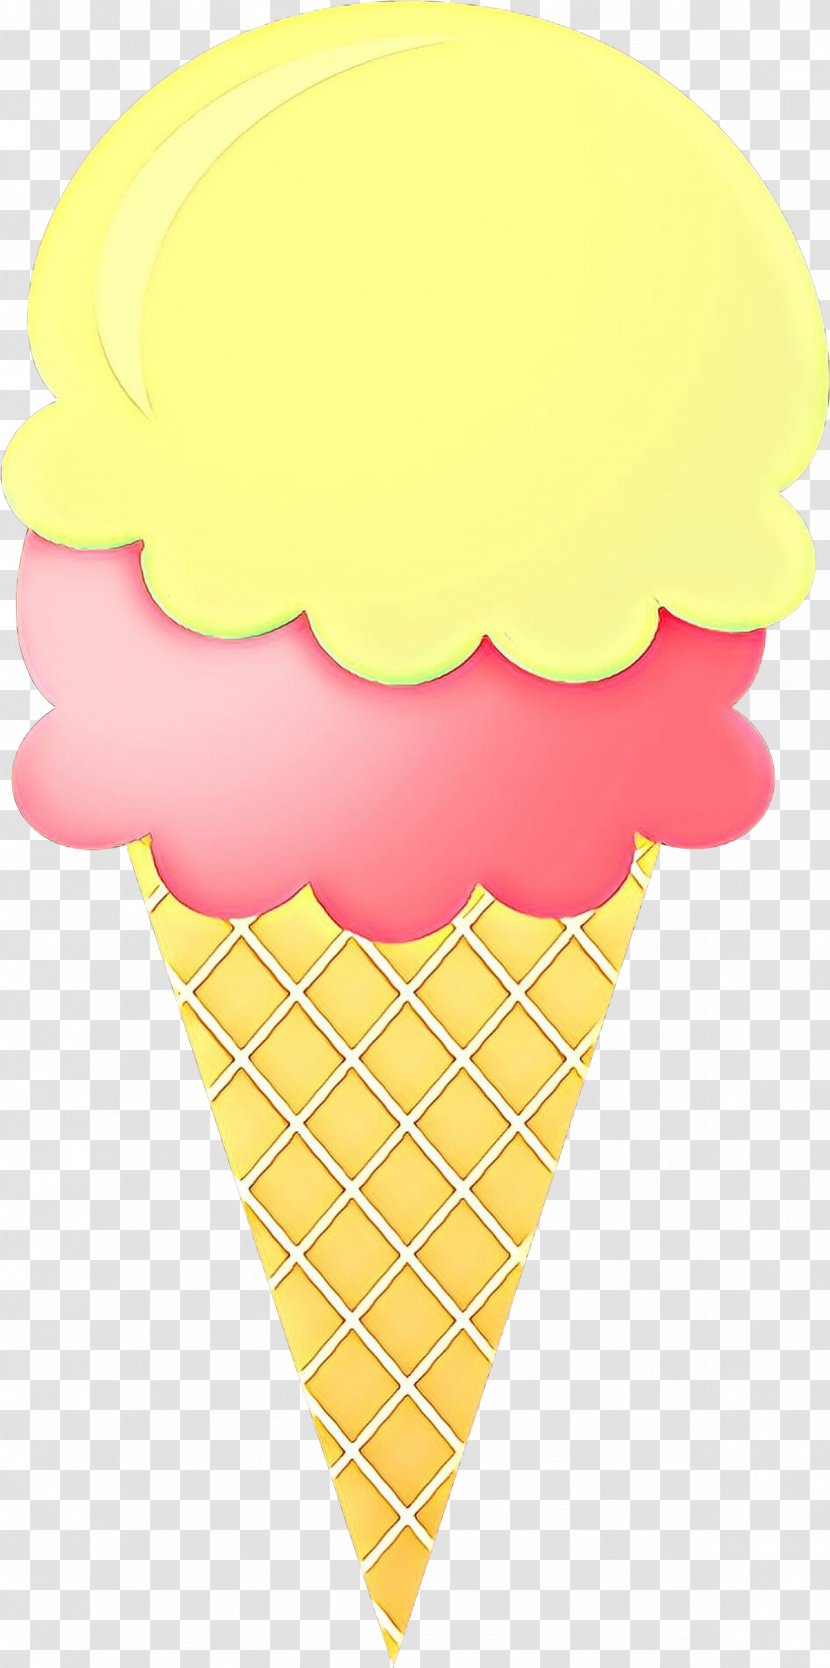 Ice Cream Cone Background - Yellow - American Food Dairy Transparent PNG